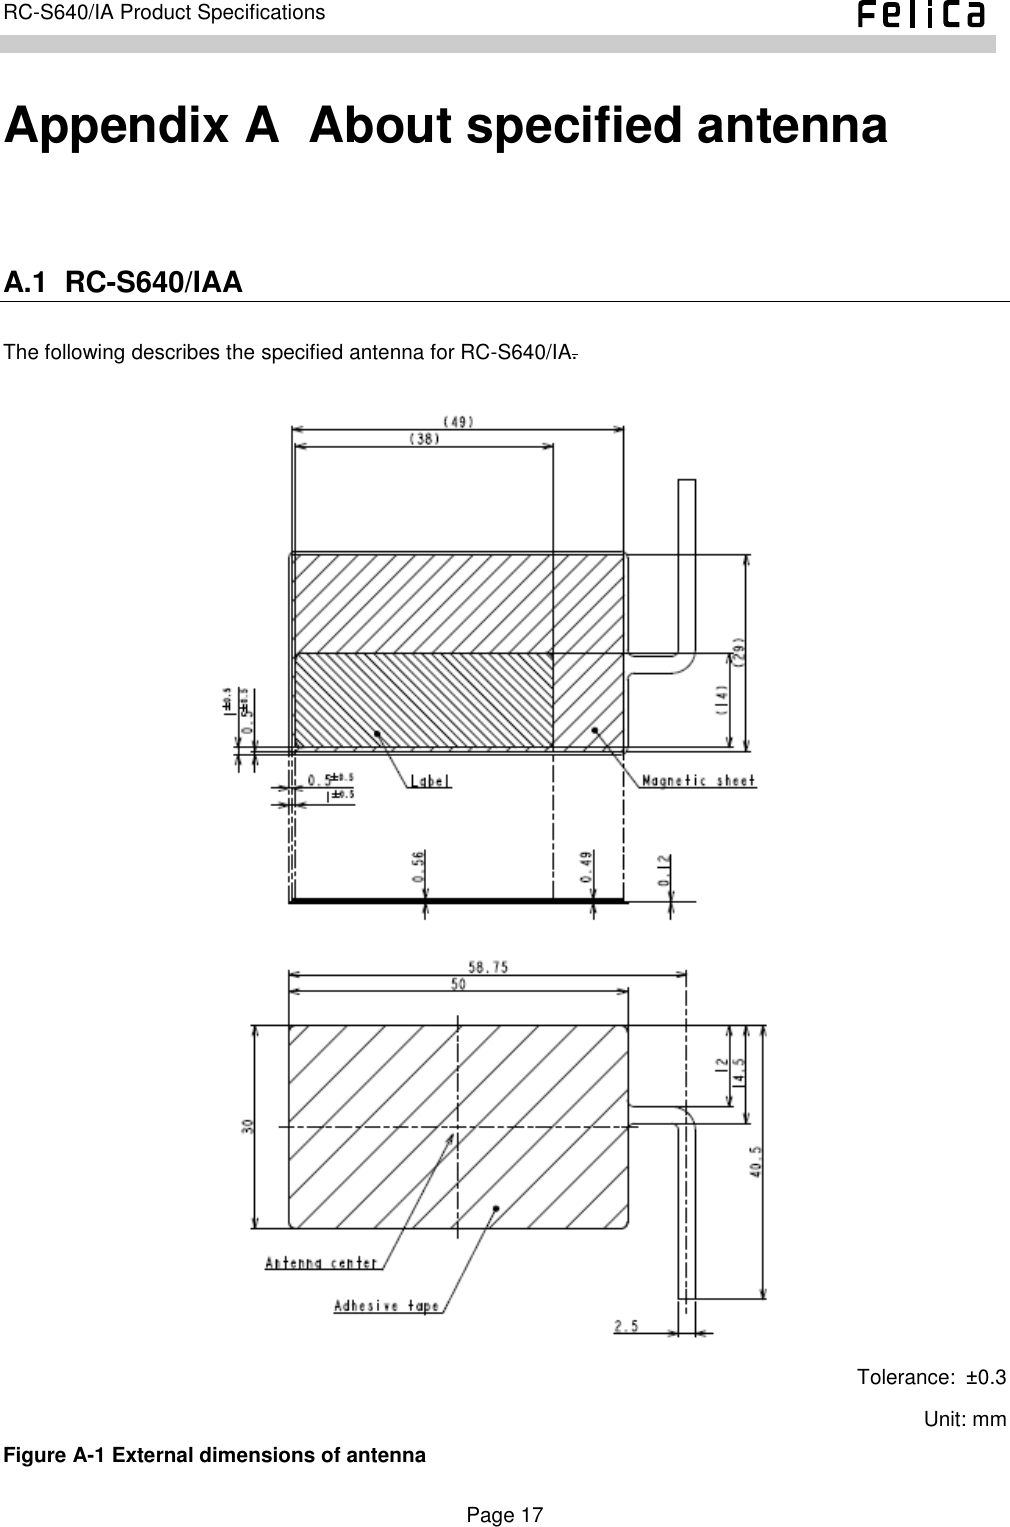    Page 17     RC-S640/IA Product Specifications    Appendix A  About specified antenna A.1  RC-S640/IAA The following describes the specified antenna for RC-S640/IA.   Tolerance:  ±0.3 Unit: mm Figure A-1 External dimensions of antenna 